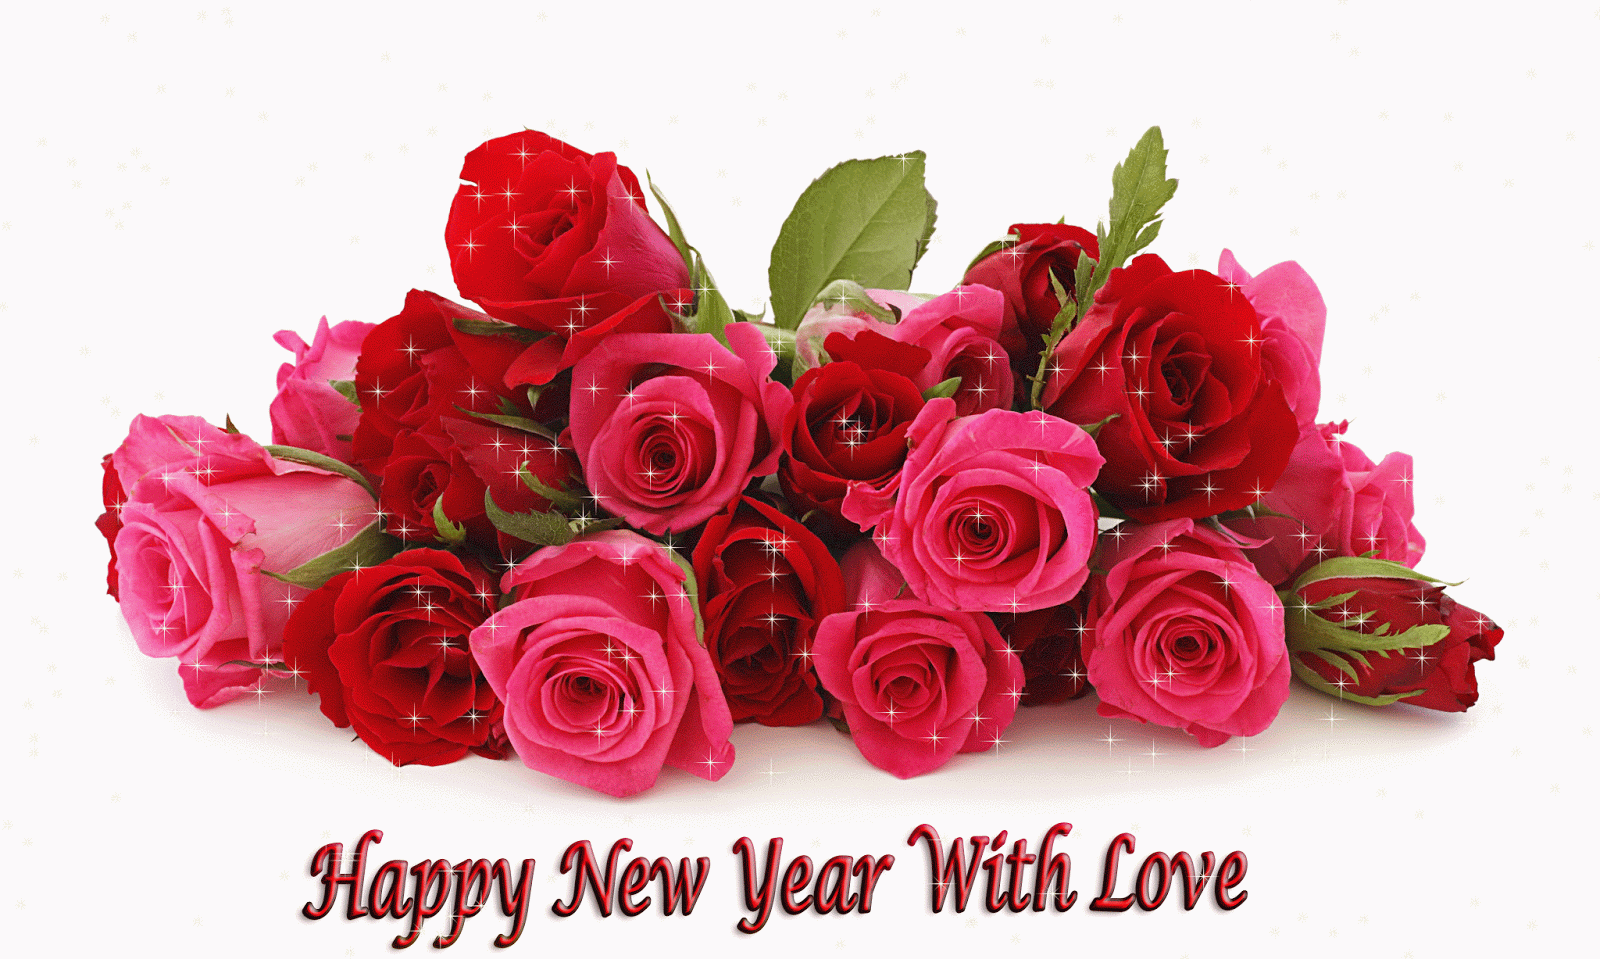 2016} Happy New Year Flowers, Butterfly Image, Picture and Wallpaper